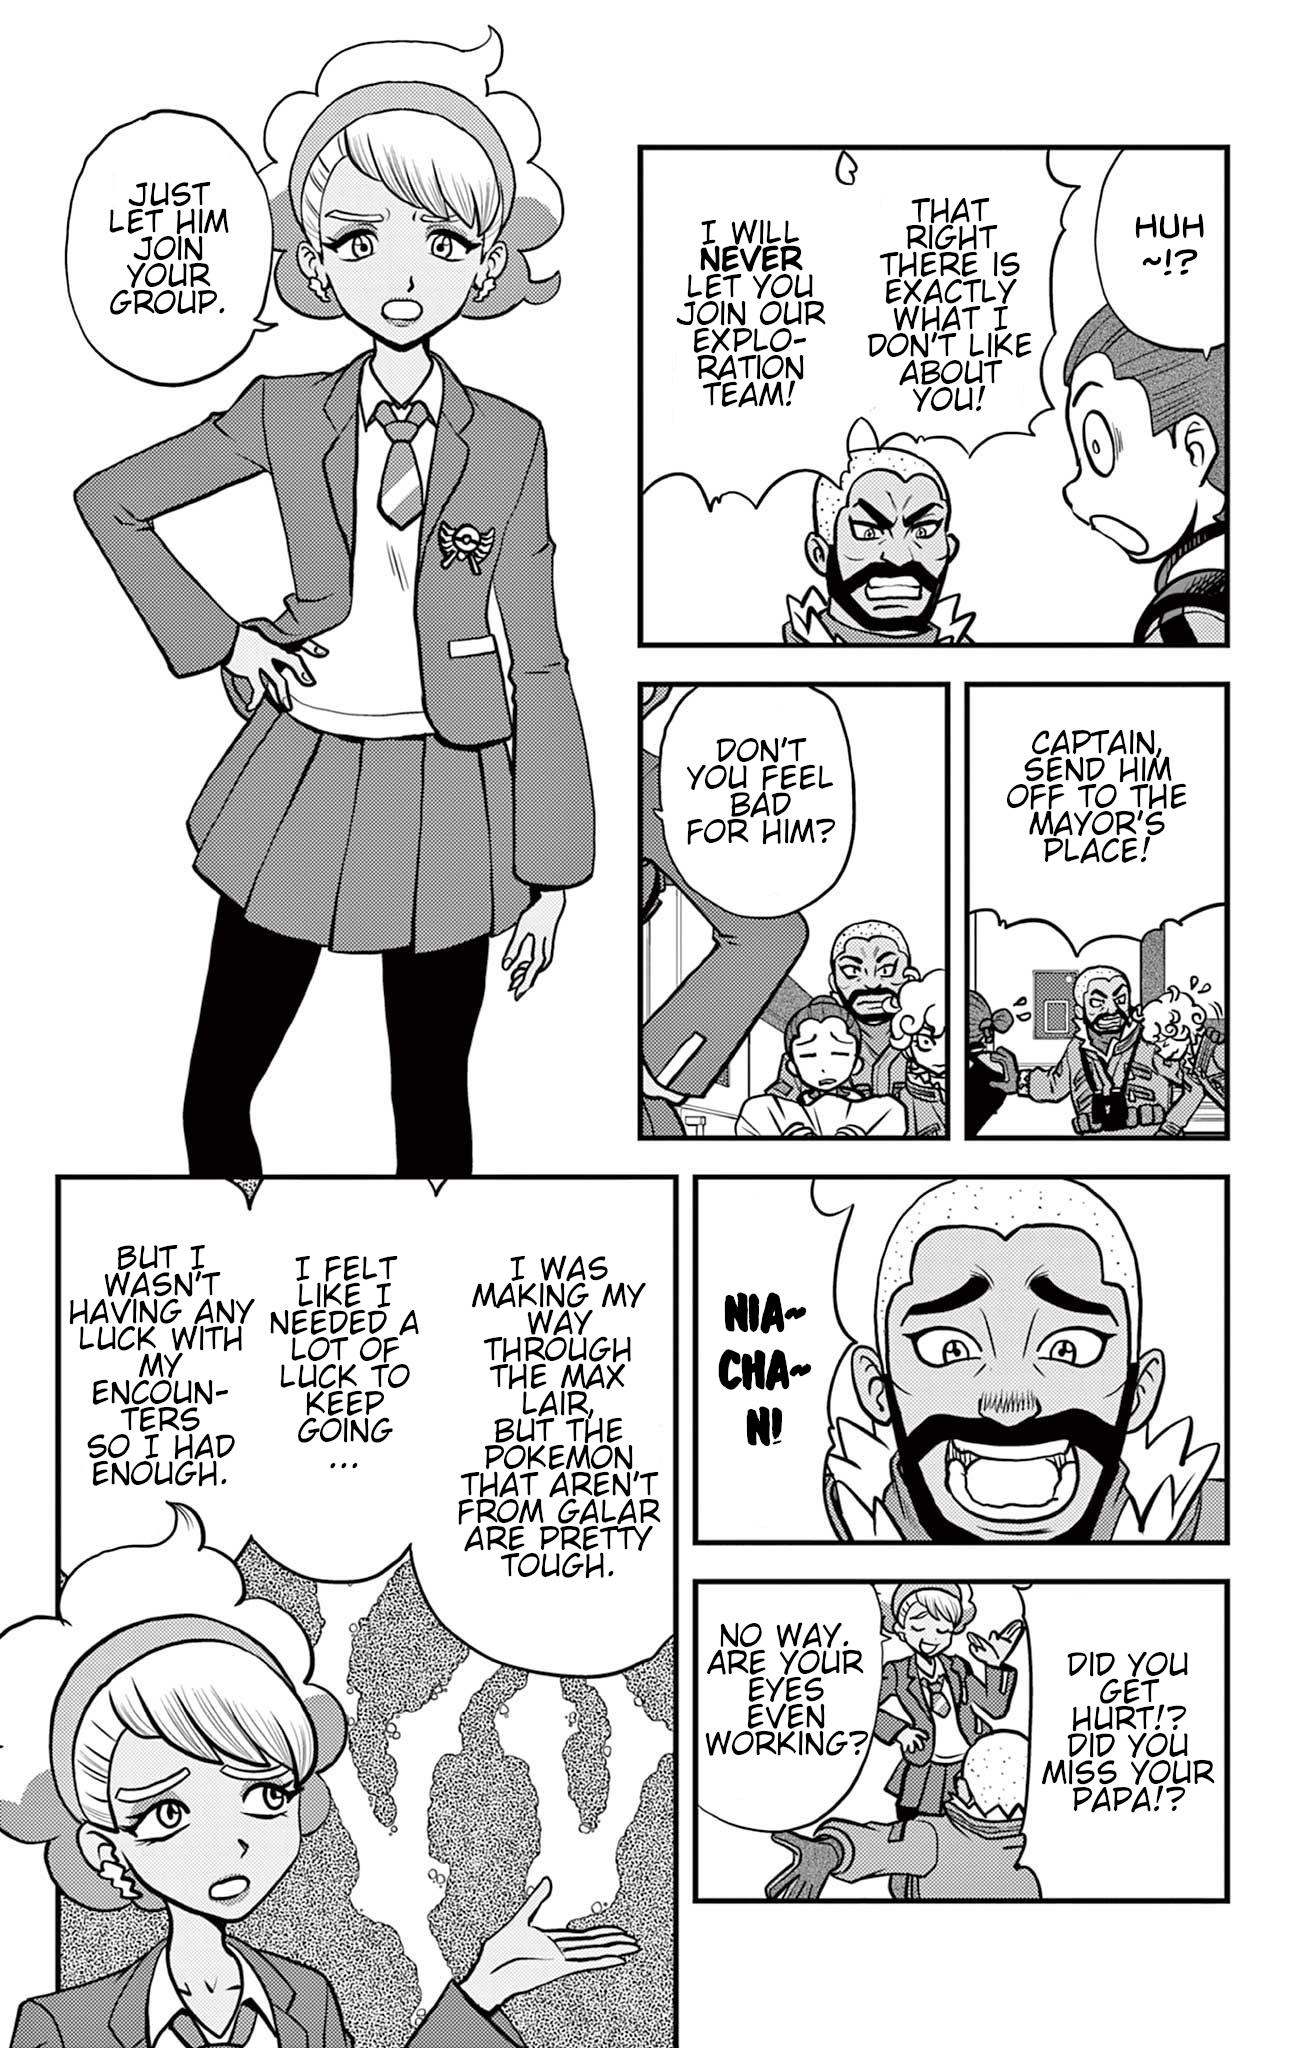 Pokémon Special Sword And Shield Vol.7 Chapter 38